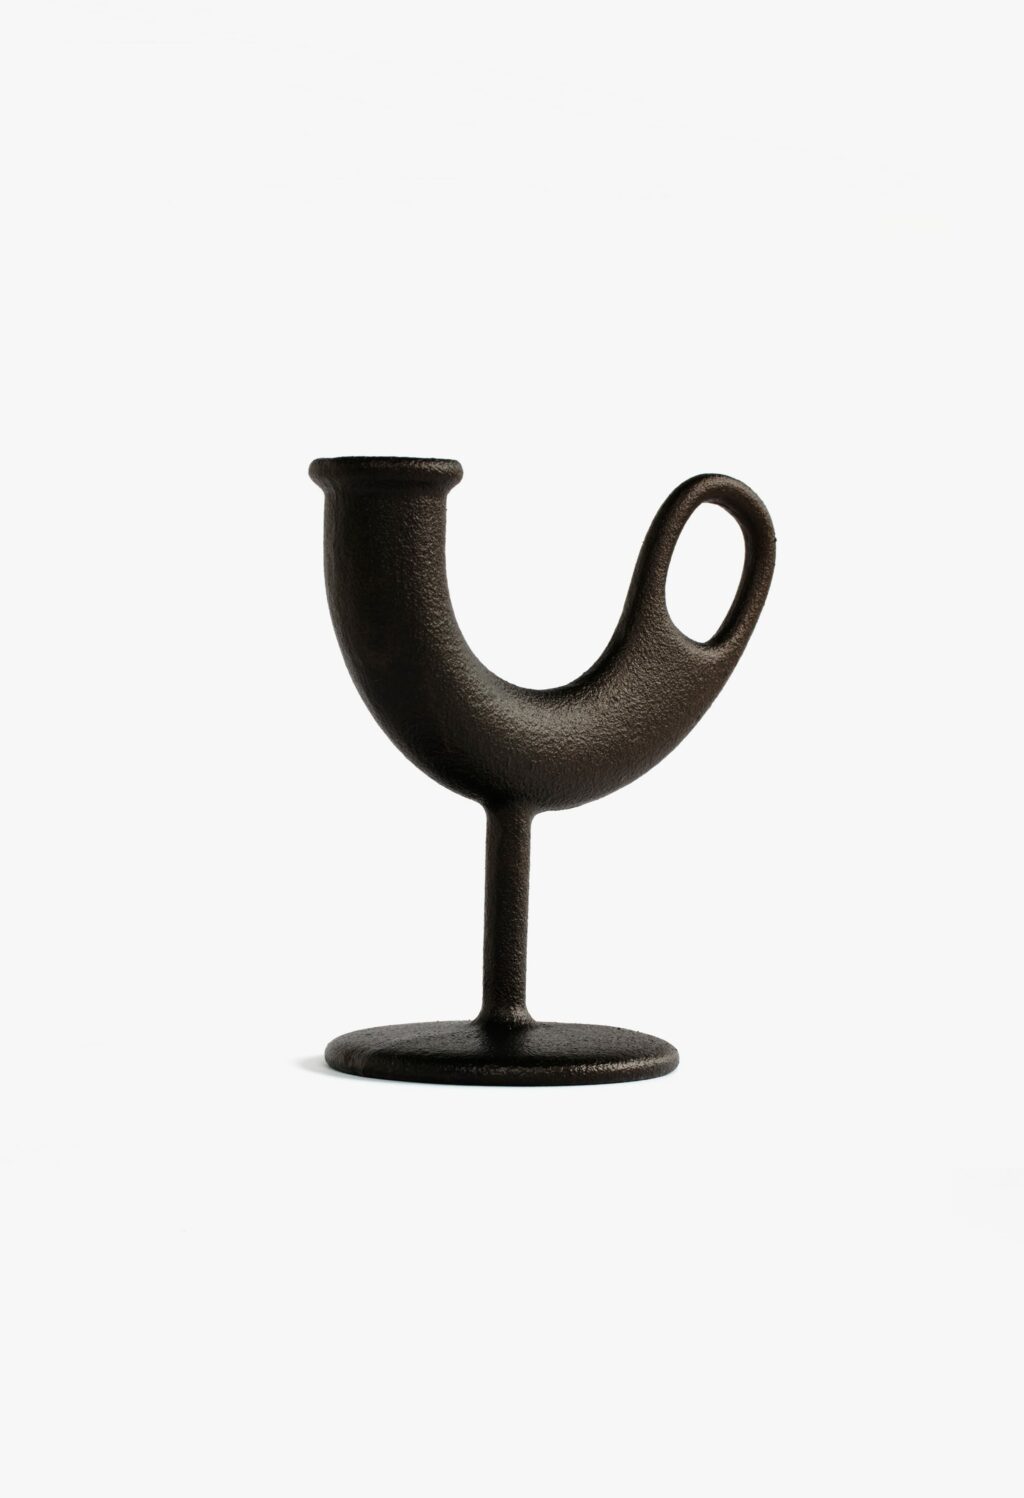 Nedre Foss - Ildhane - Candle stick by Anderssen and Voll - black cast iron